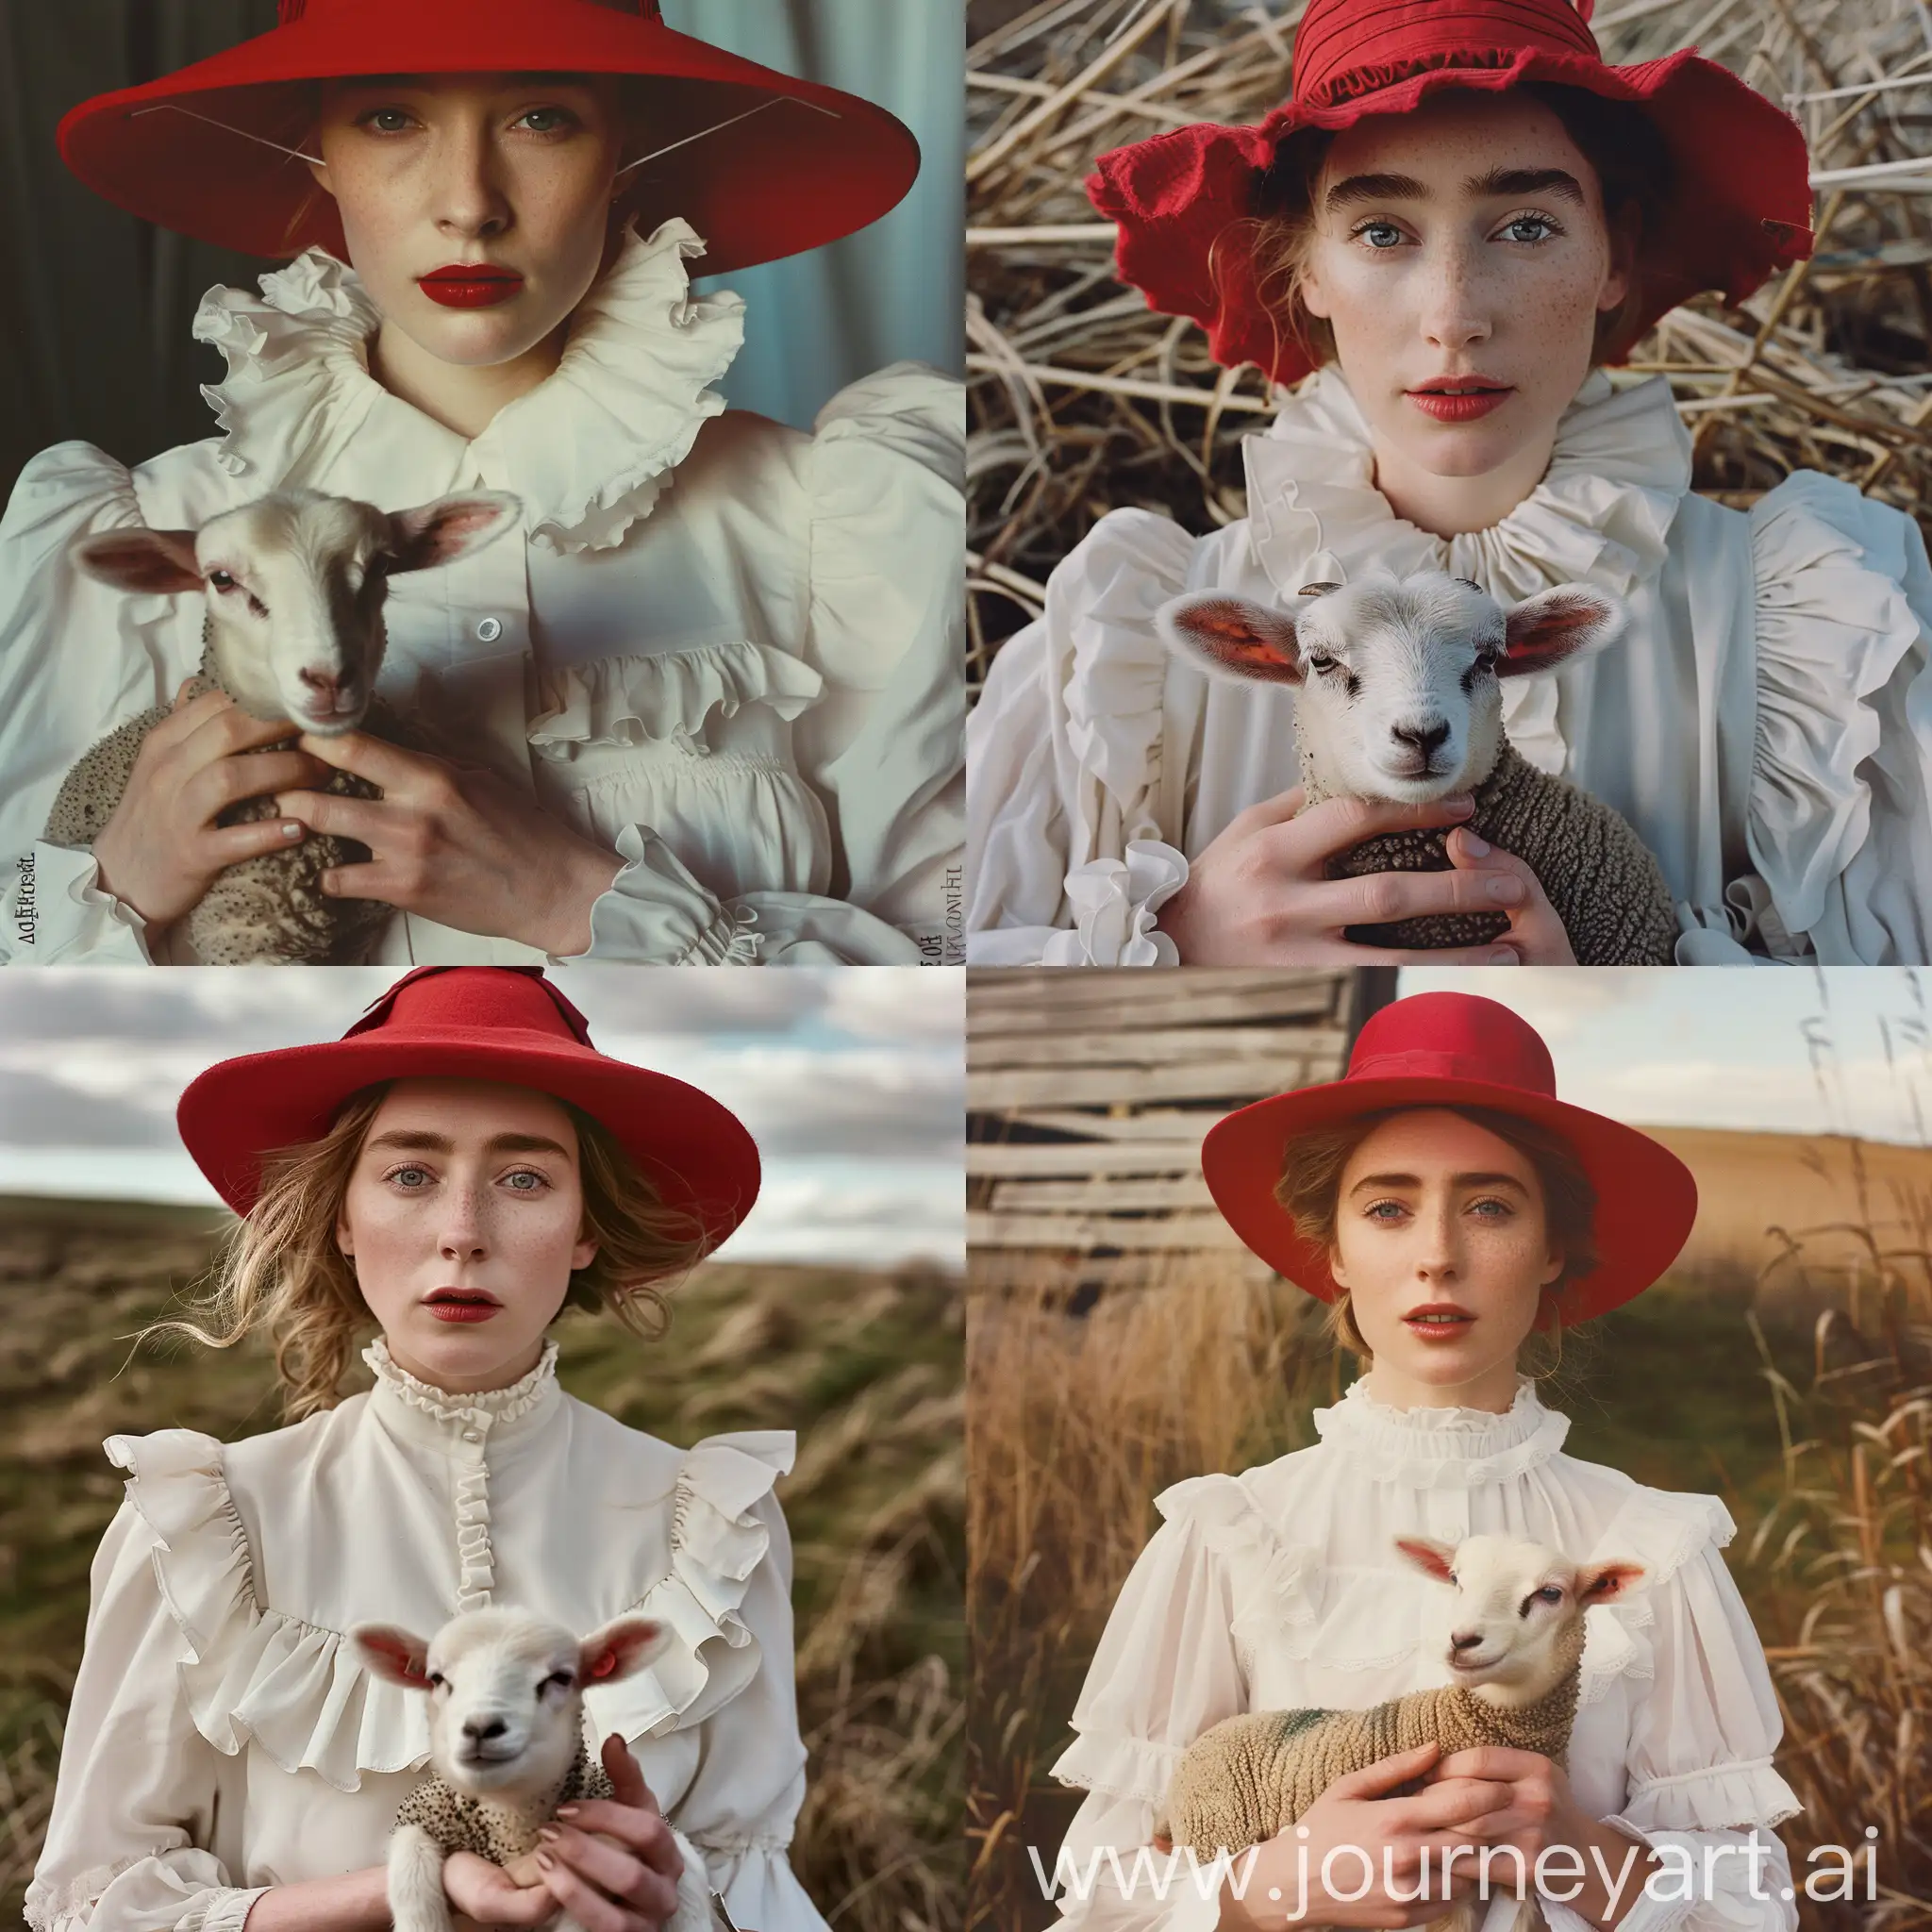 Saoirse-Ronan-in-Vogue-Chic-Red-Hat-and-Lamb-on-Farm